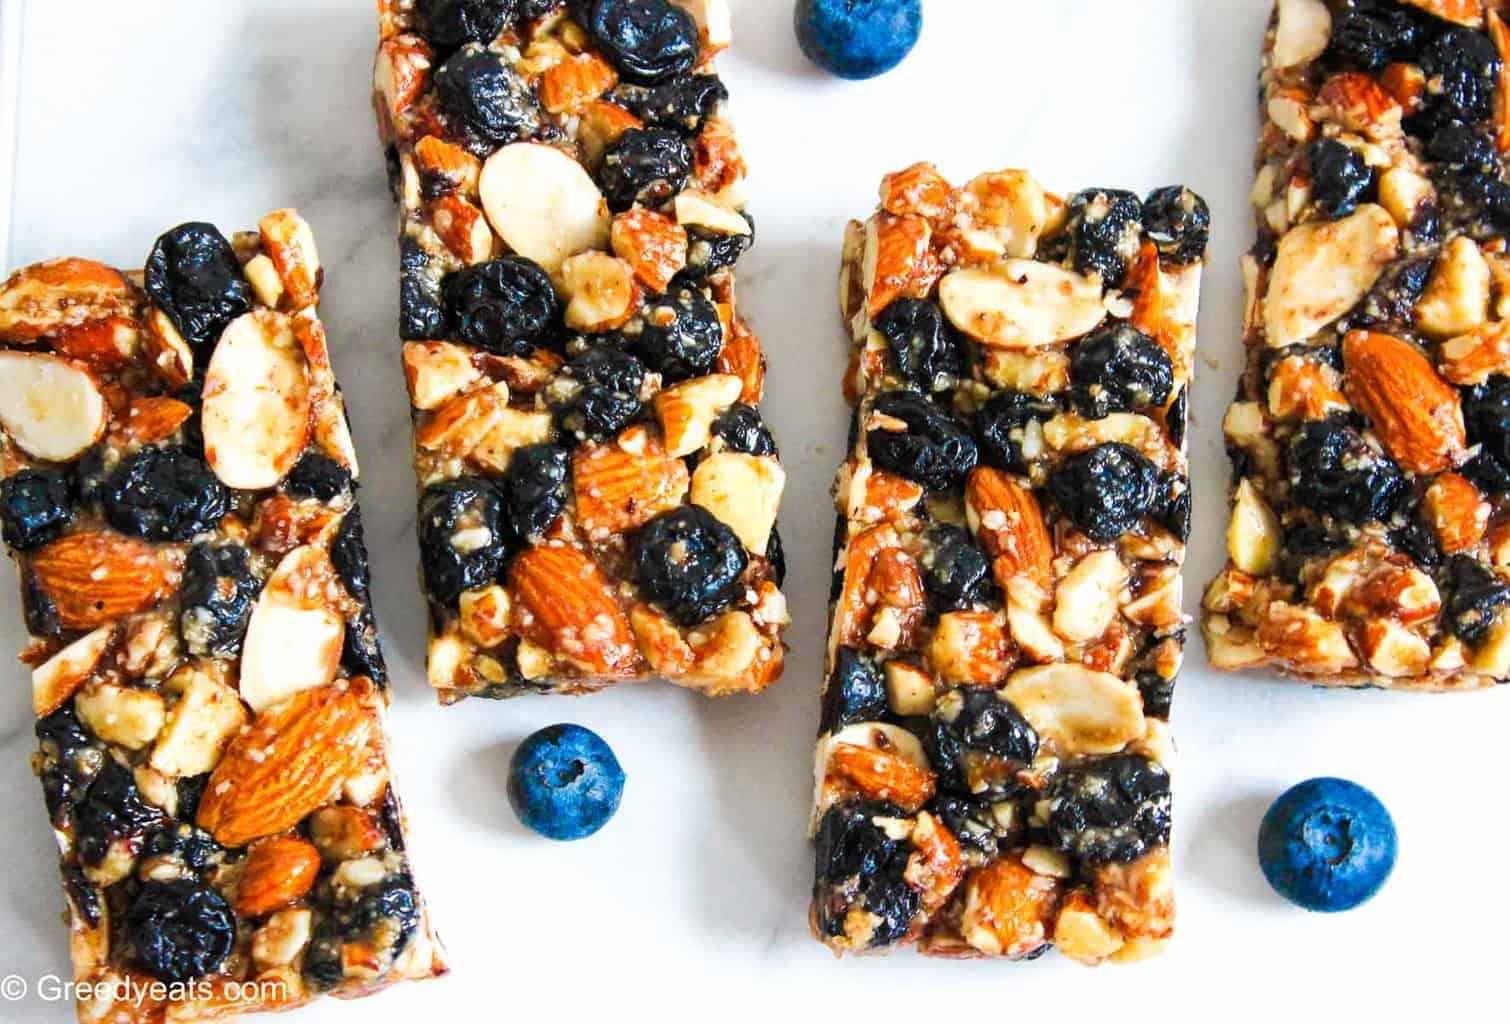 Naturally sweetened, perfectly chewy and wholesome Almond Bars for your snack time cravings.